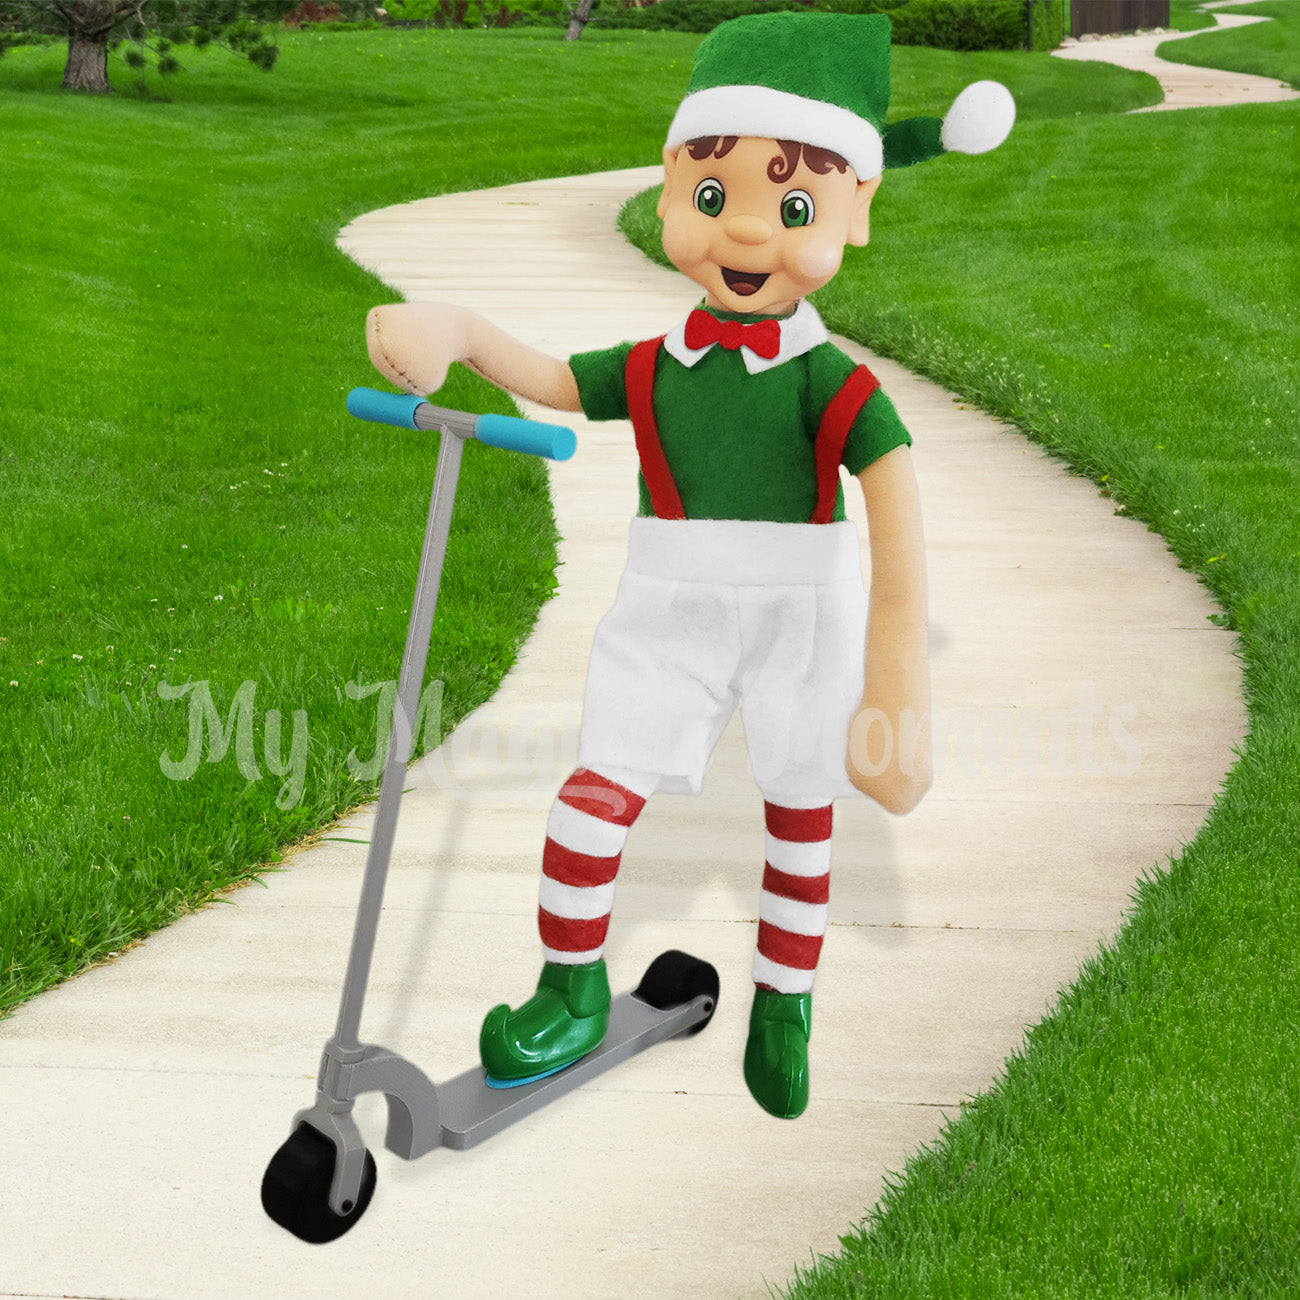 My elf friends using an elf sized scooter prop on a footpath